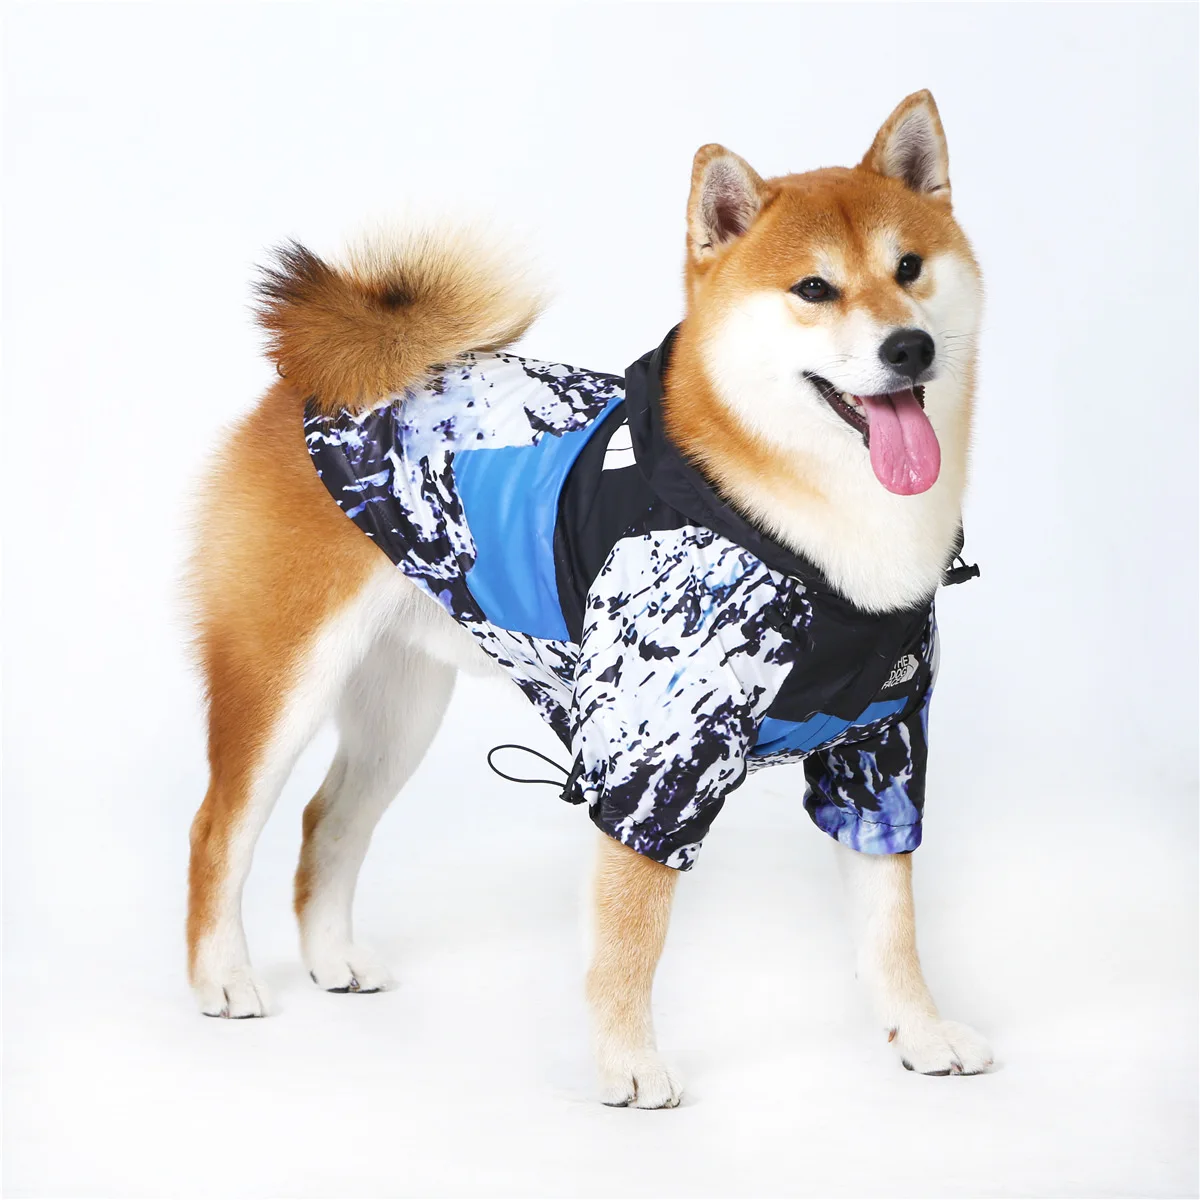 

dog Winter jacket American flag windproof rainproof dog cotton clothing large dog raincoat Winter clothes for dogs dog supplies